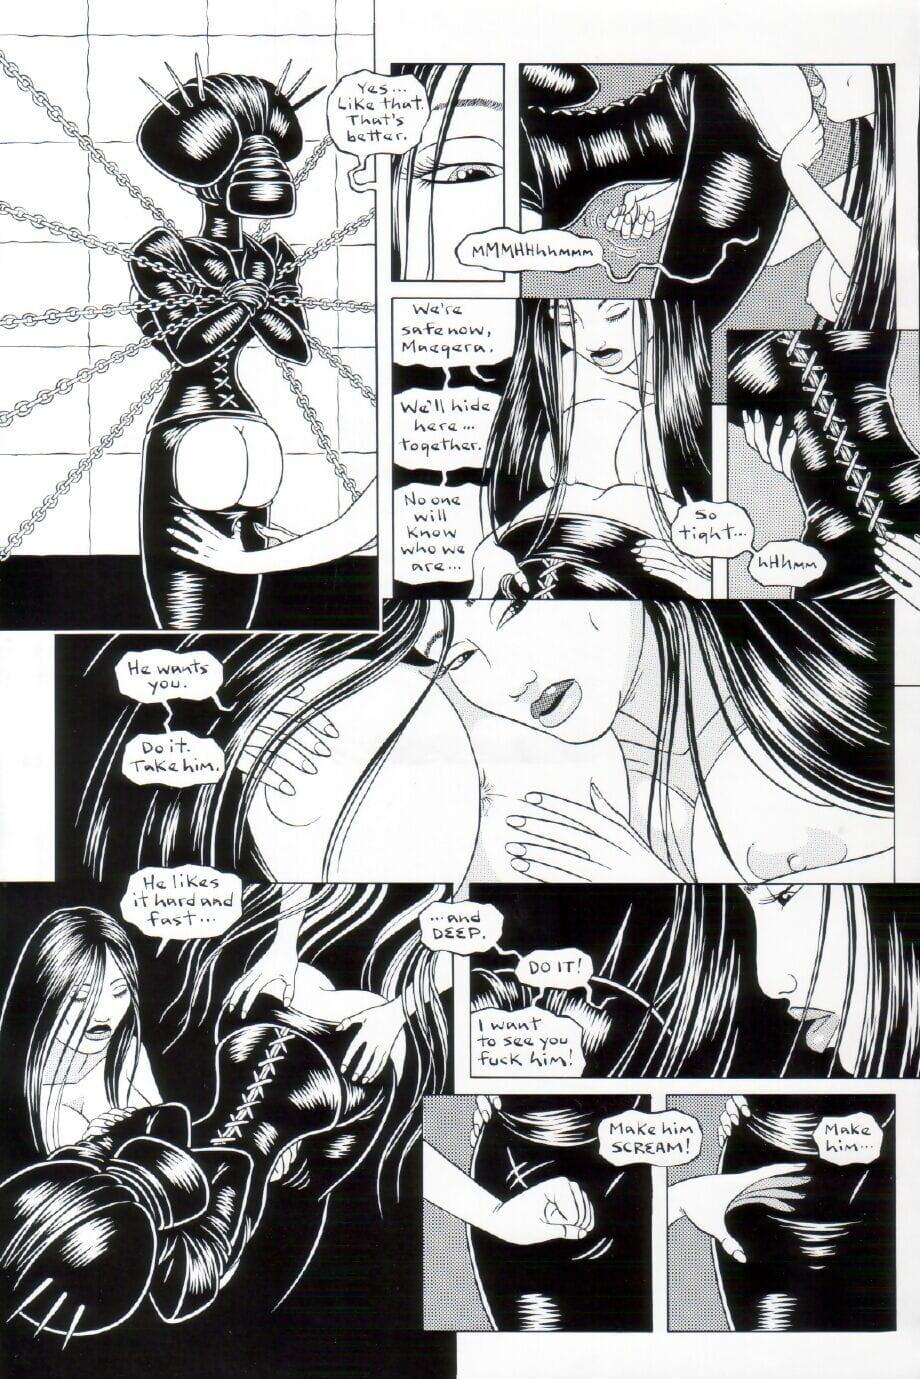 In a Metal Web #1 - part 2 page 1